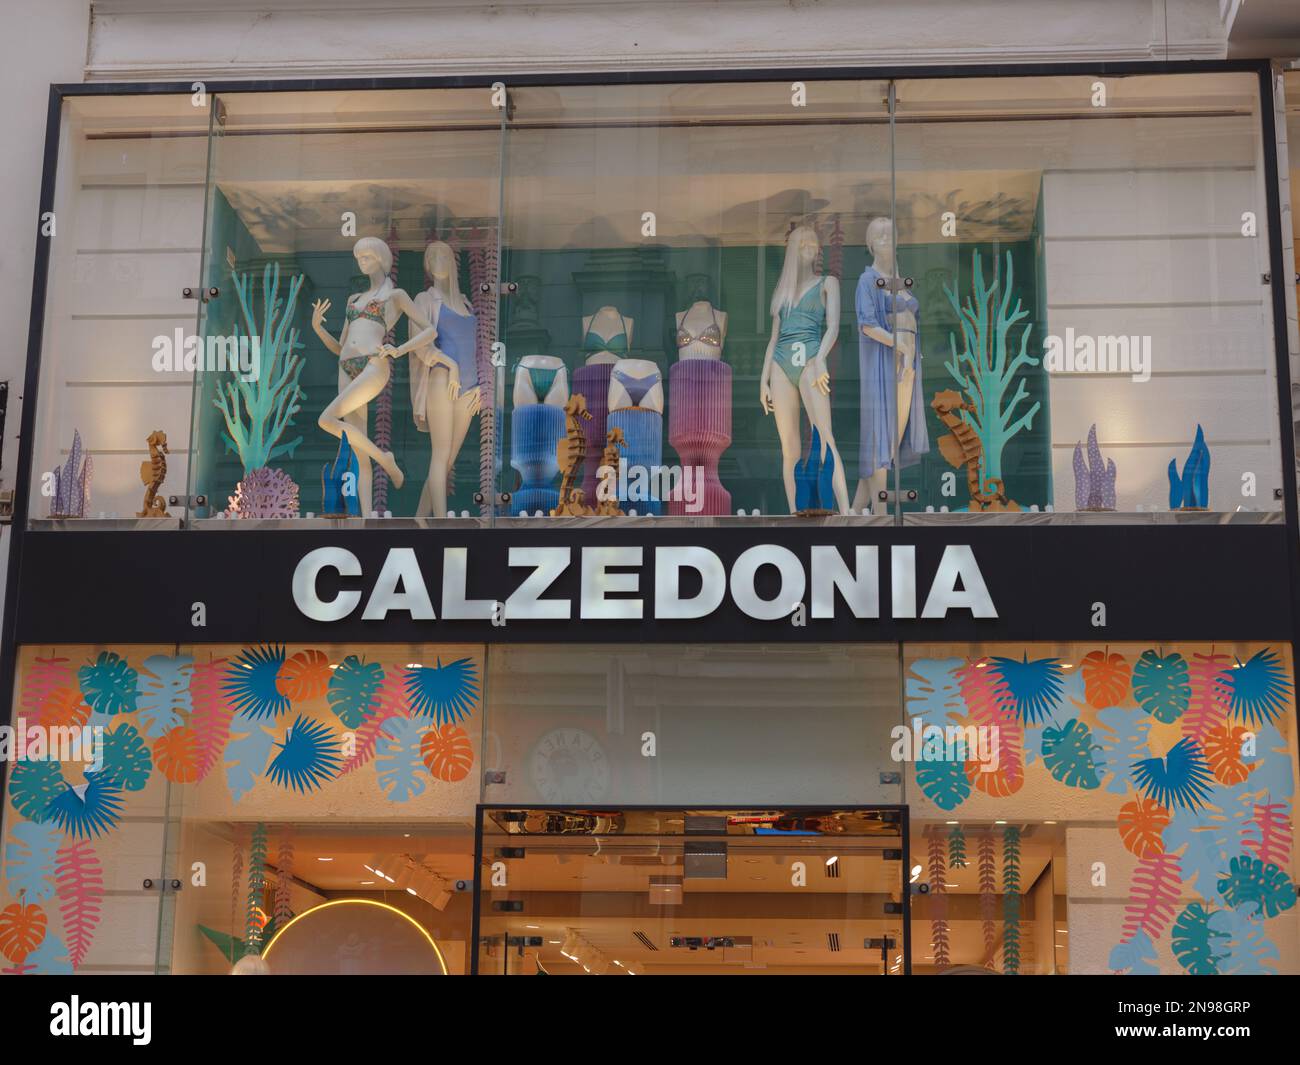 https://c8.alamy.com/comp/2N98GRP/vienna-austria-august-8-2022-calzedonia-logo-on-store-calzedonia-is-italian-fashion-brand-that-sells-bathing-suits-tights-and-leggings-2N98GRP.jpg